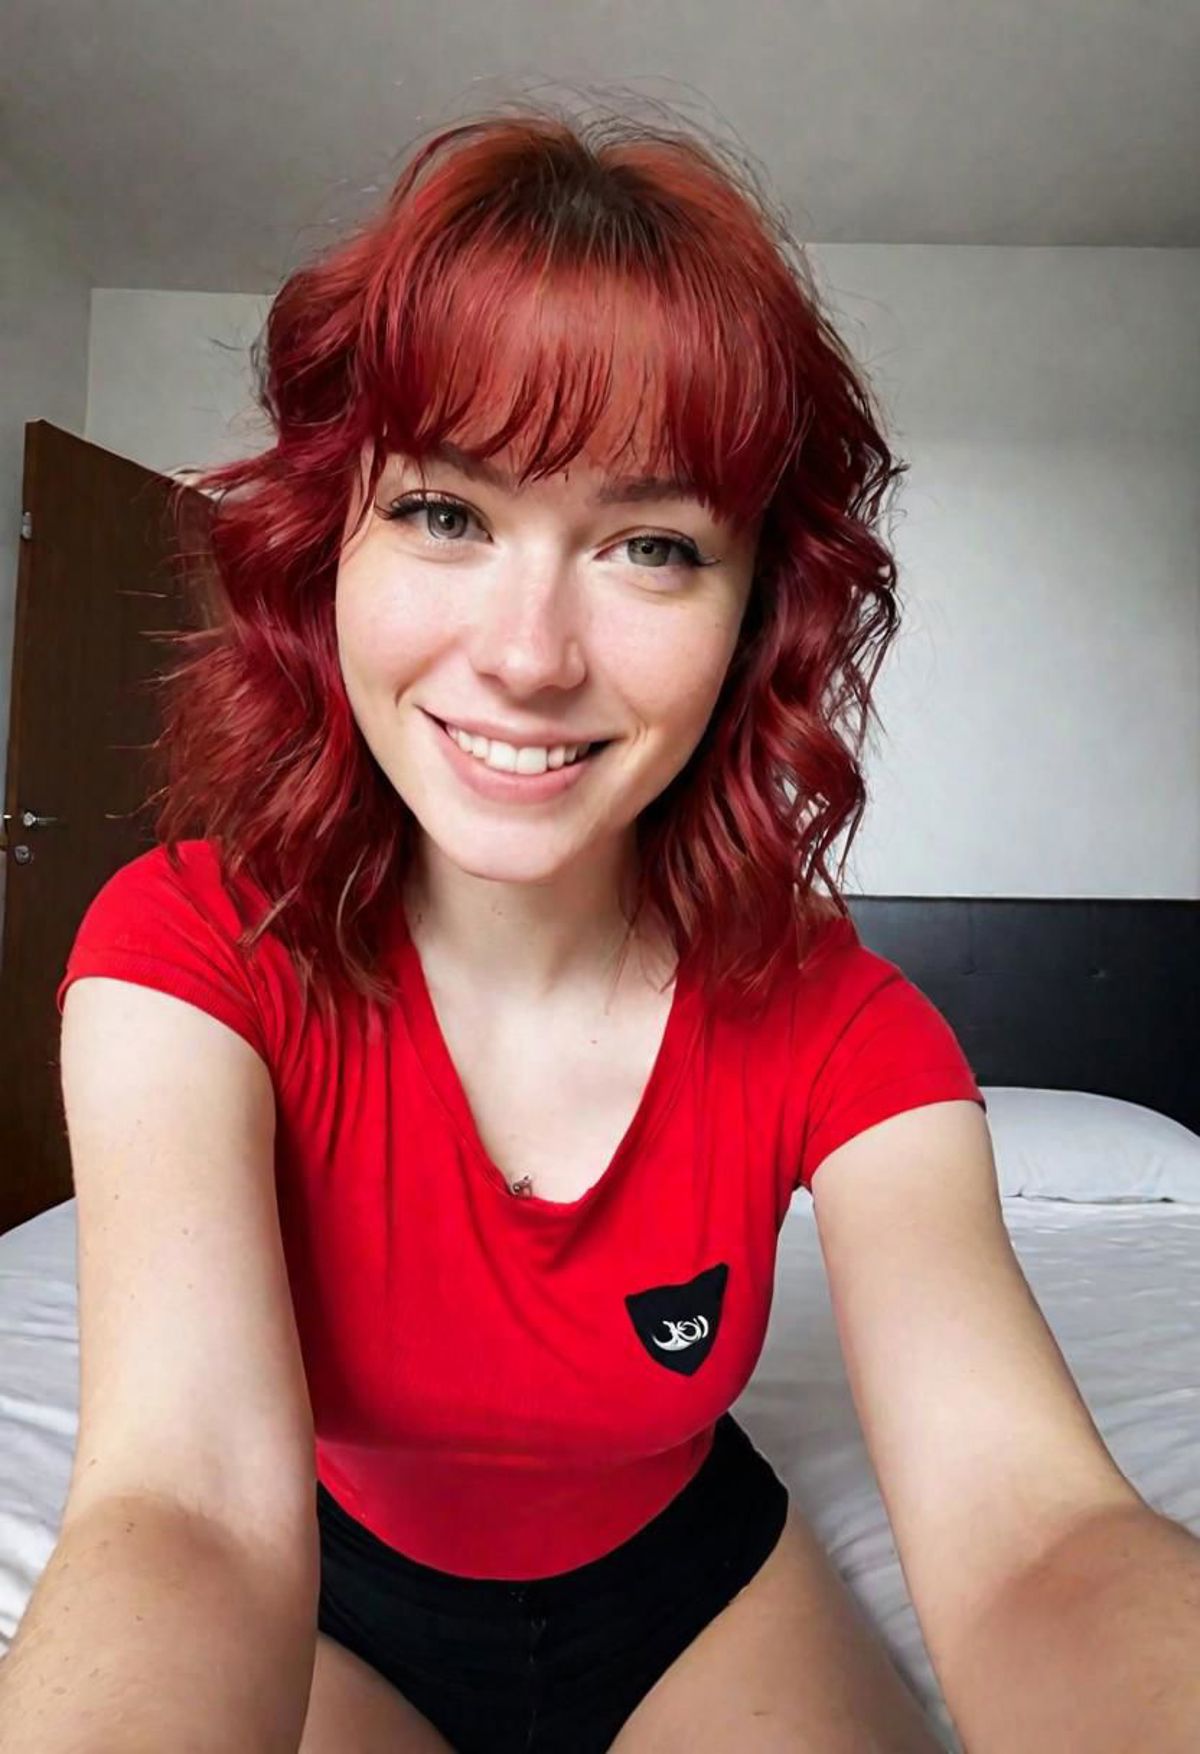 A full-body "Selfie taken with the front camera of an iPhone 15 in a close-up shot." female figure, a smiling and sexy red...